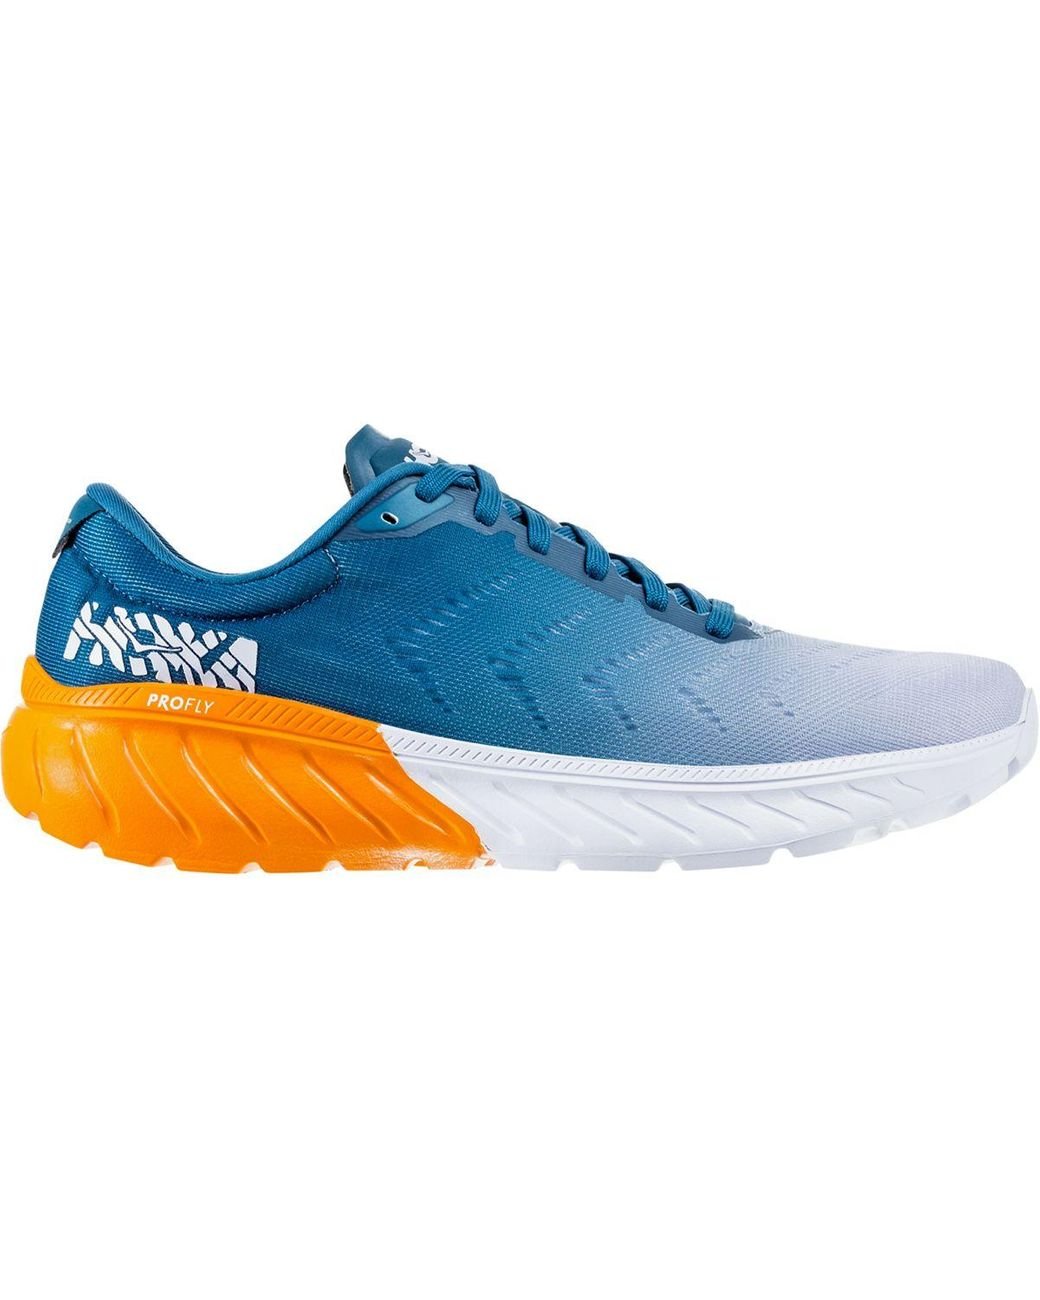 Hoka One One Rubber Mach 2 Running Shoe in Blue for Men - Lyst